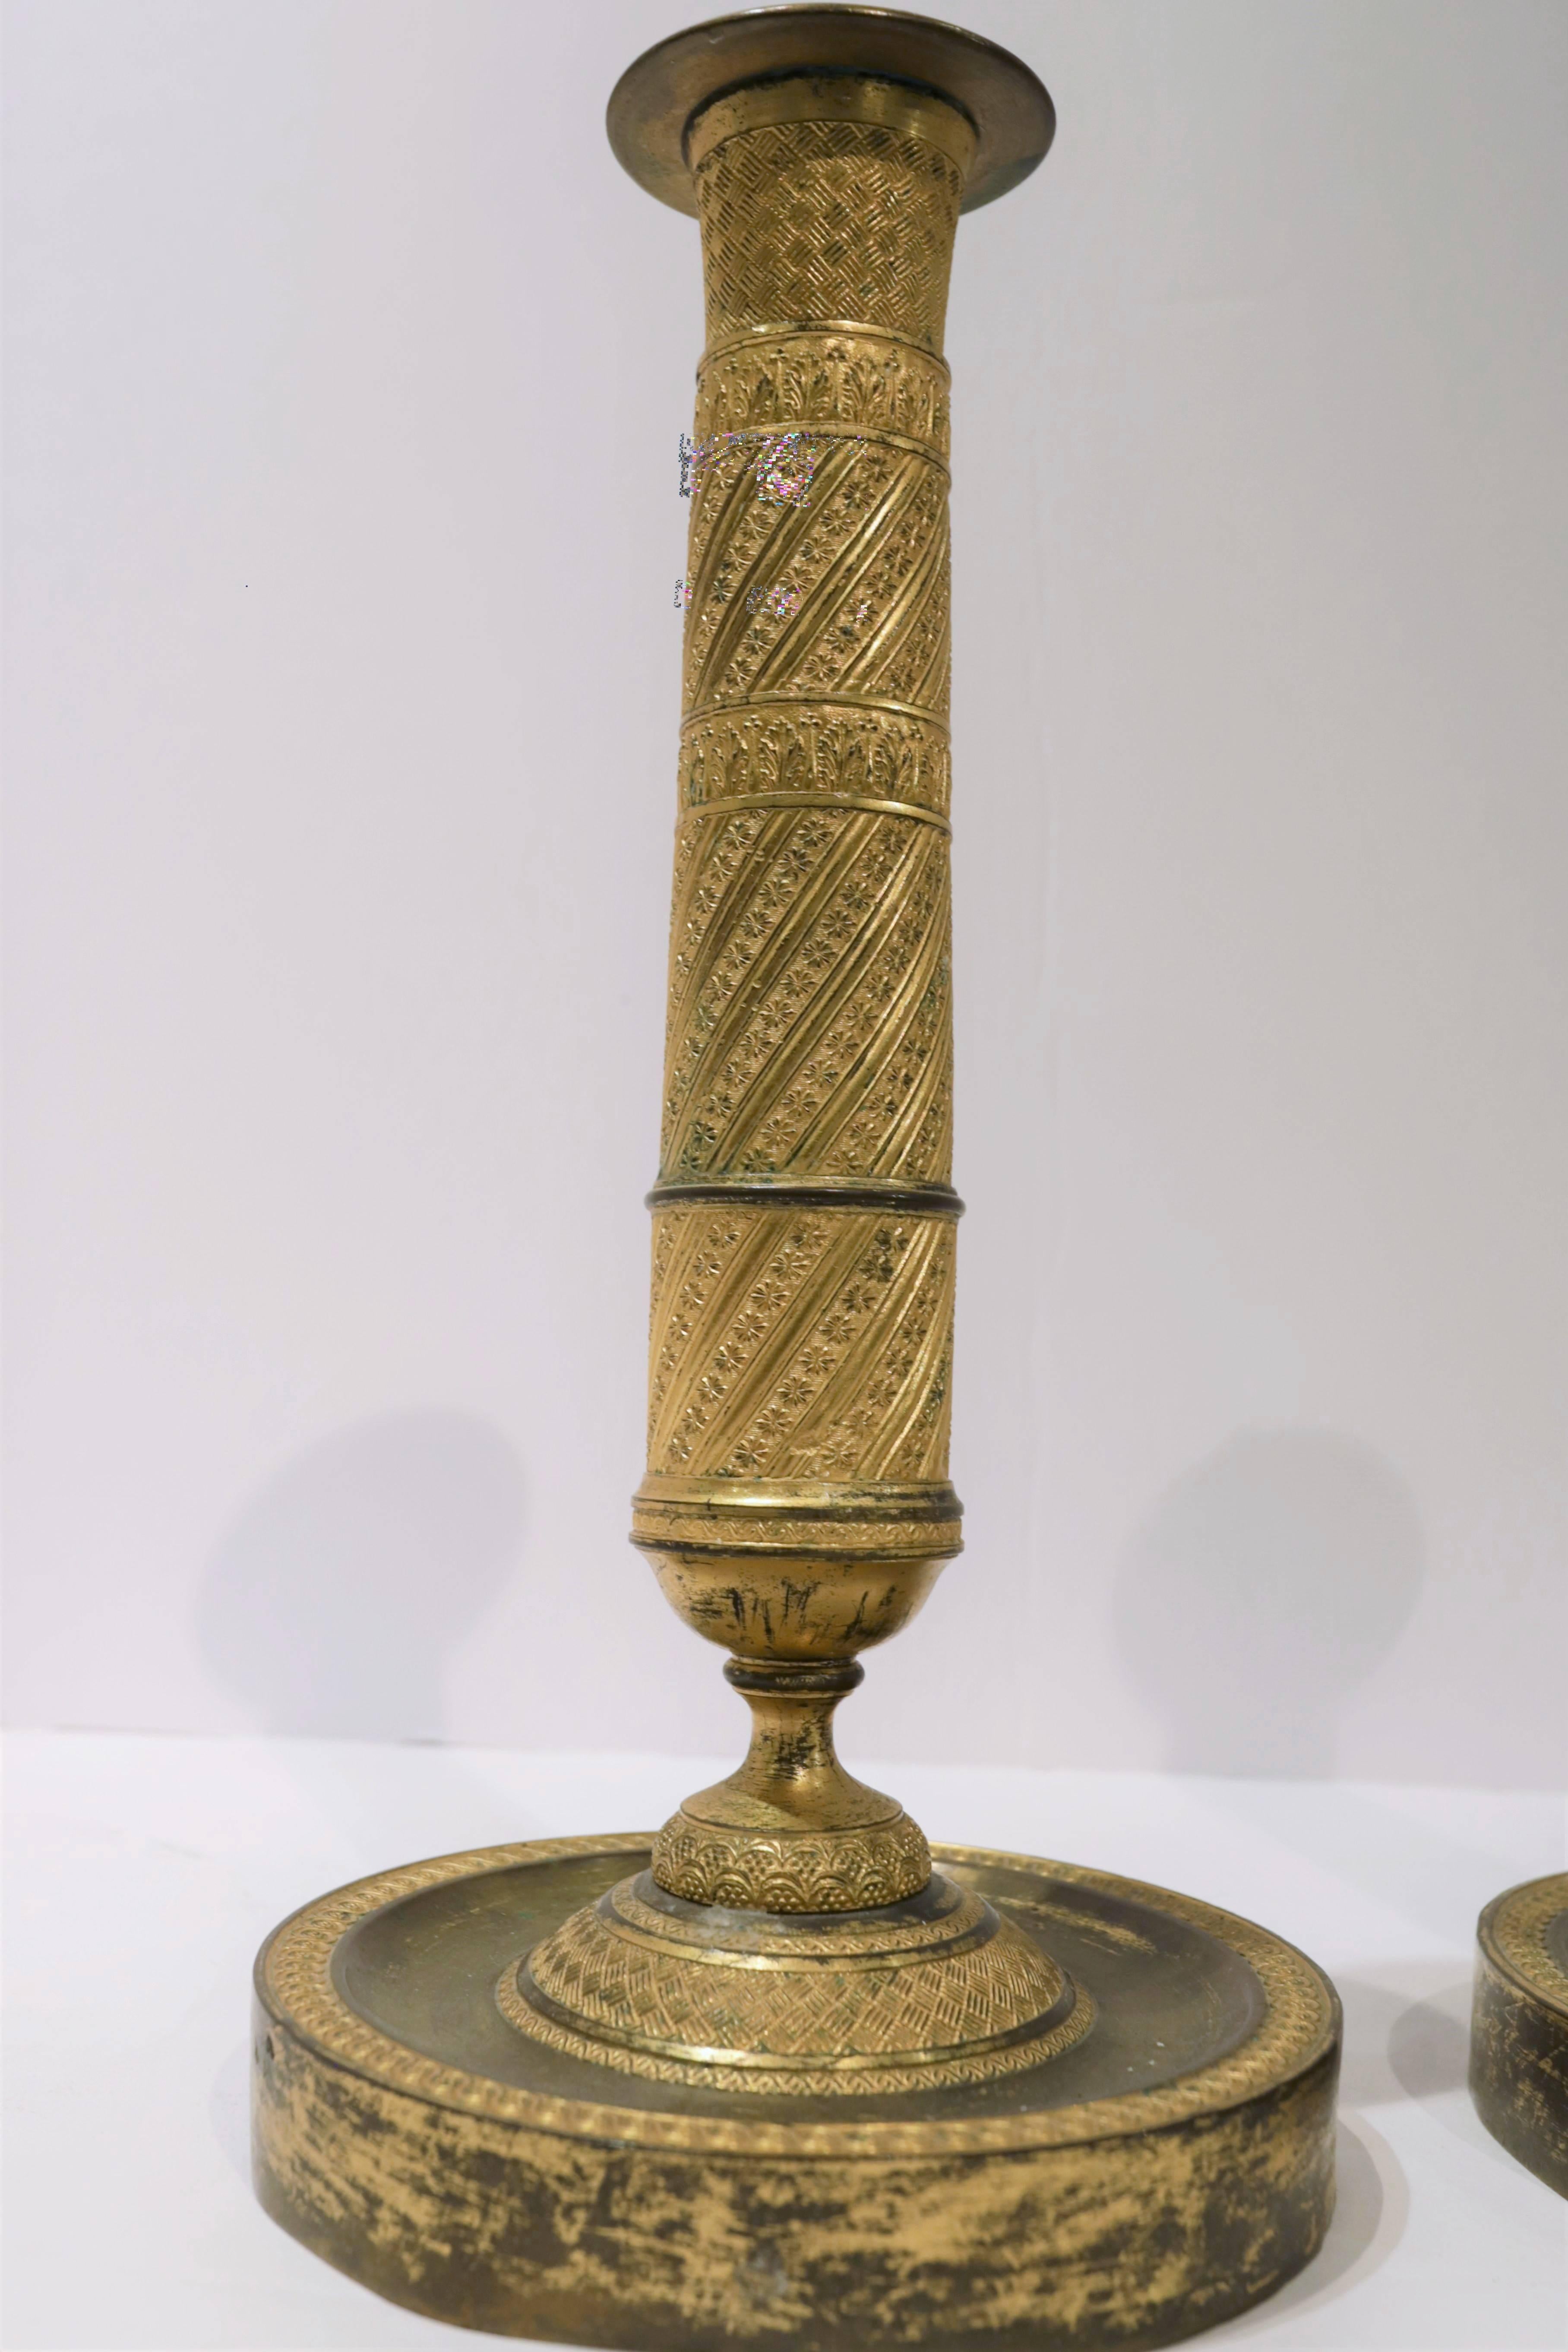 Pair of early 19th century French Empire gilt bronze candlesticks.